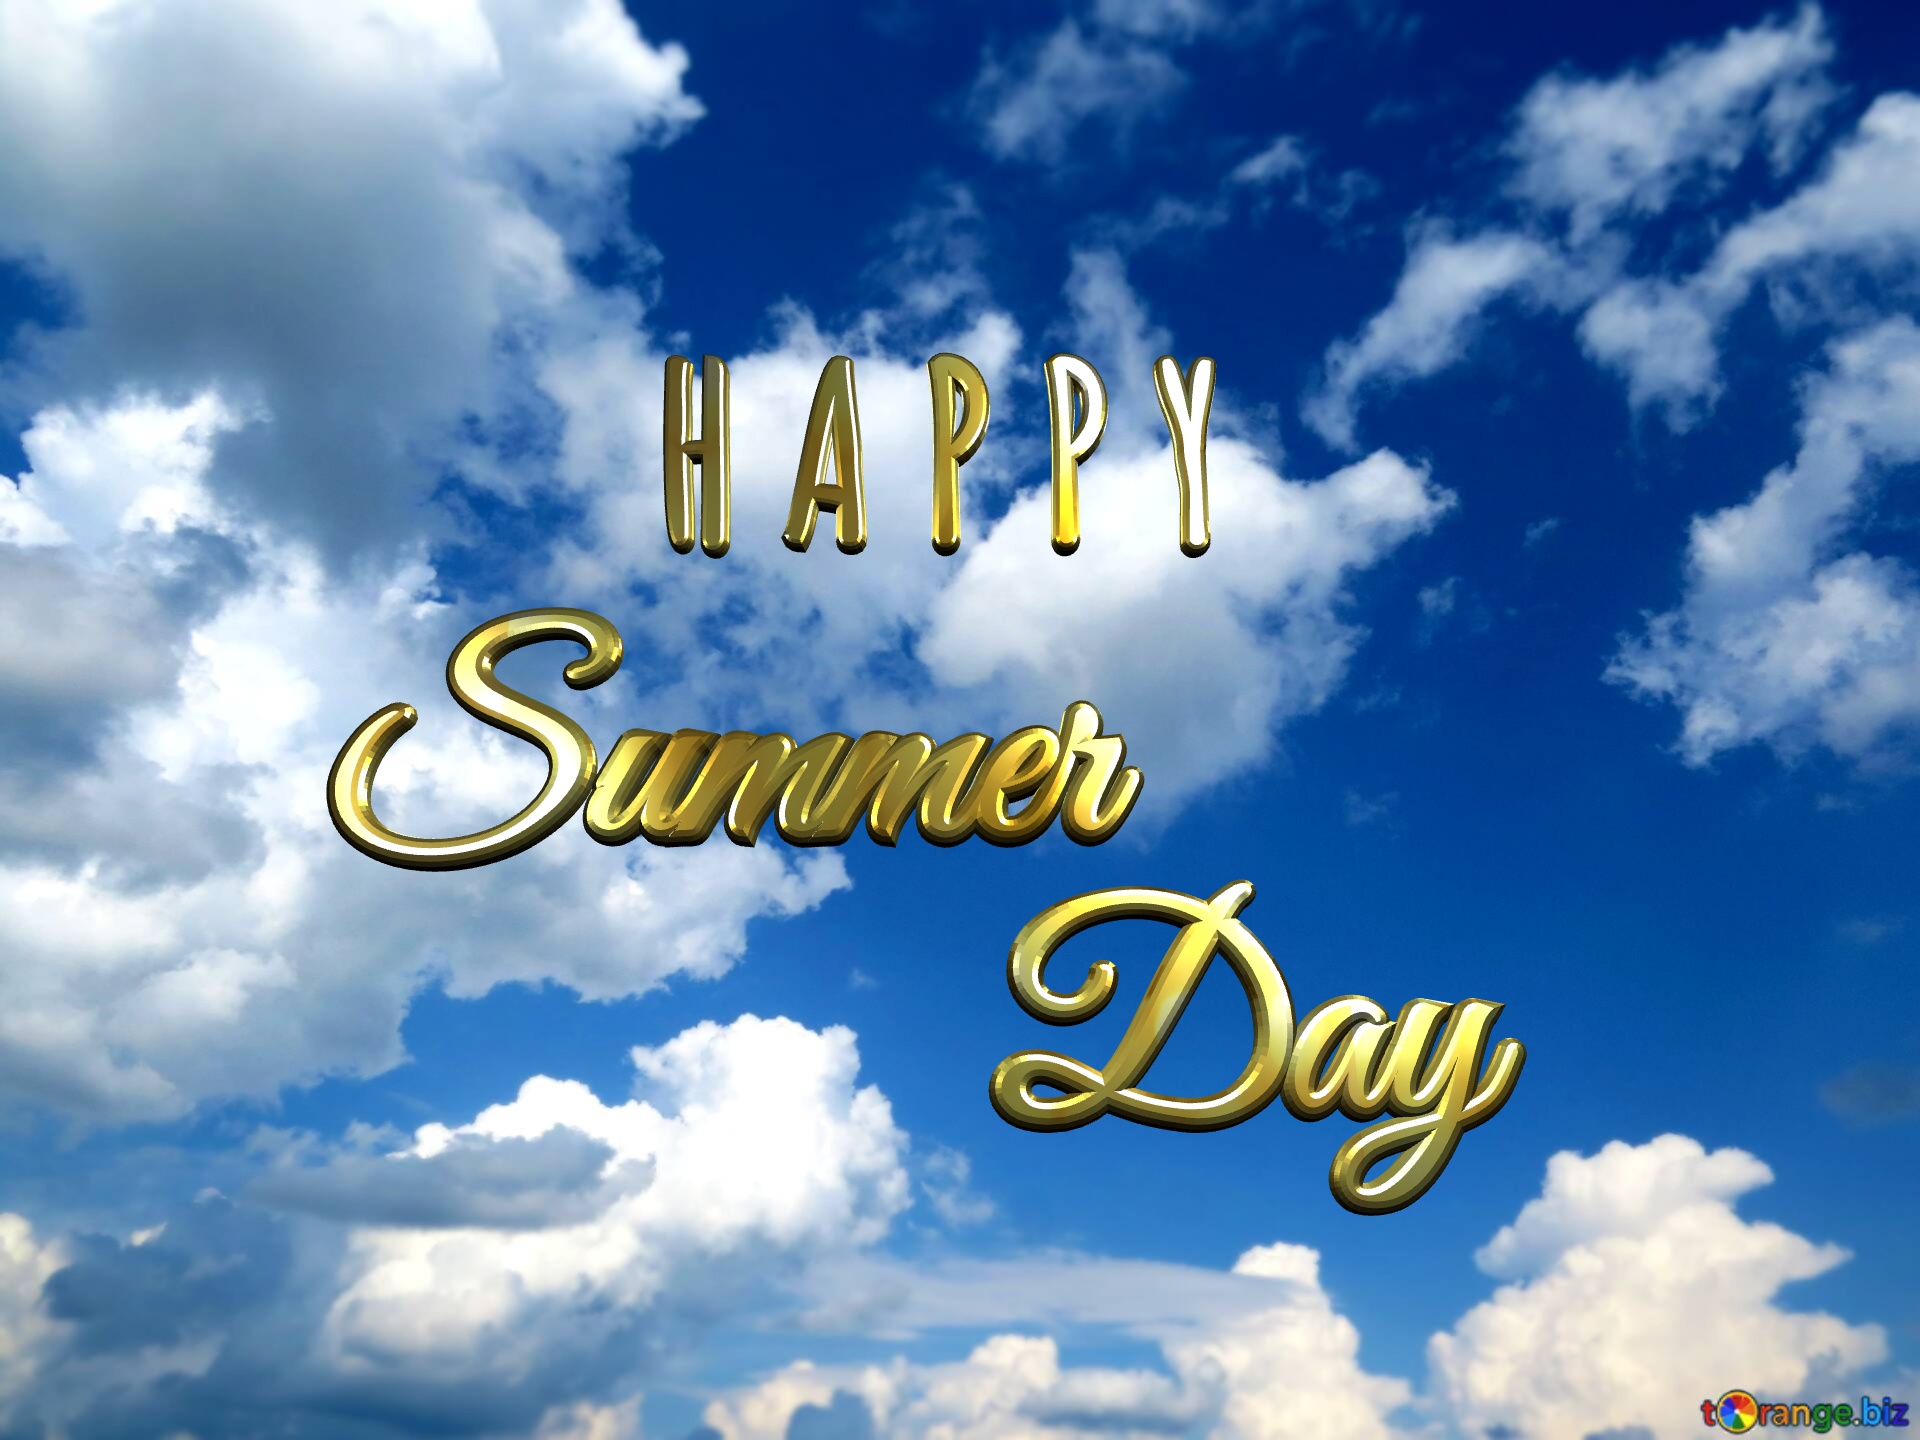 H A P P Y Summer Day clear sky background №0